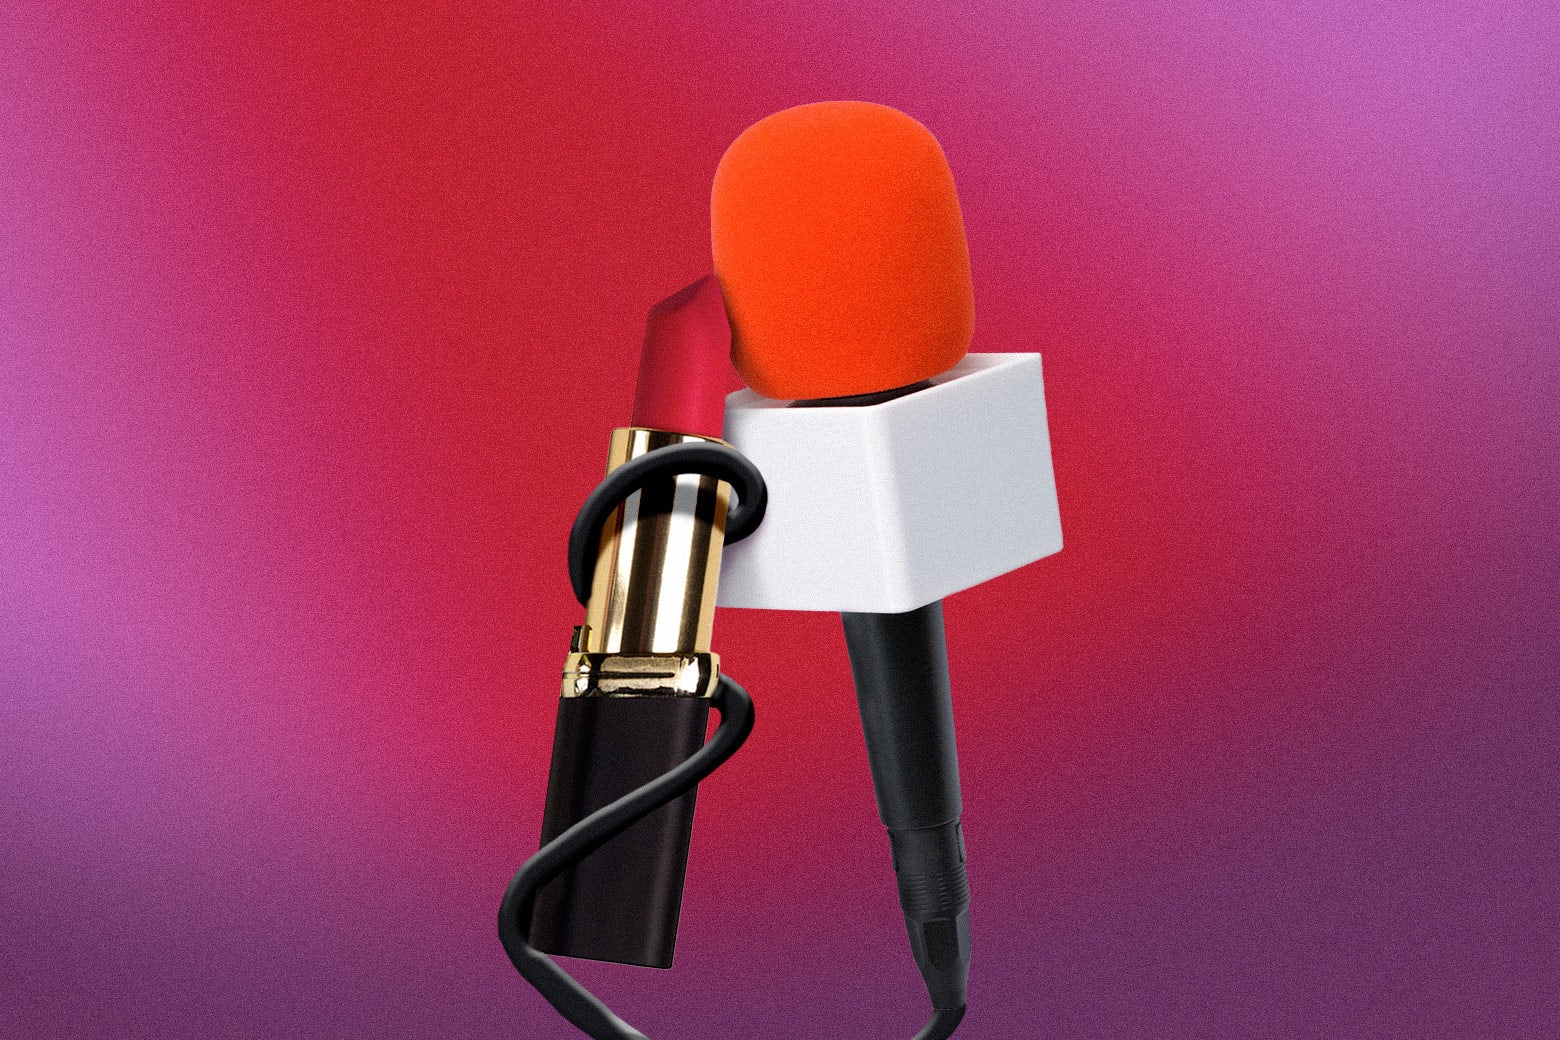 A tube of red lipstick leans into a microphone.